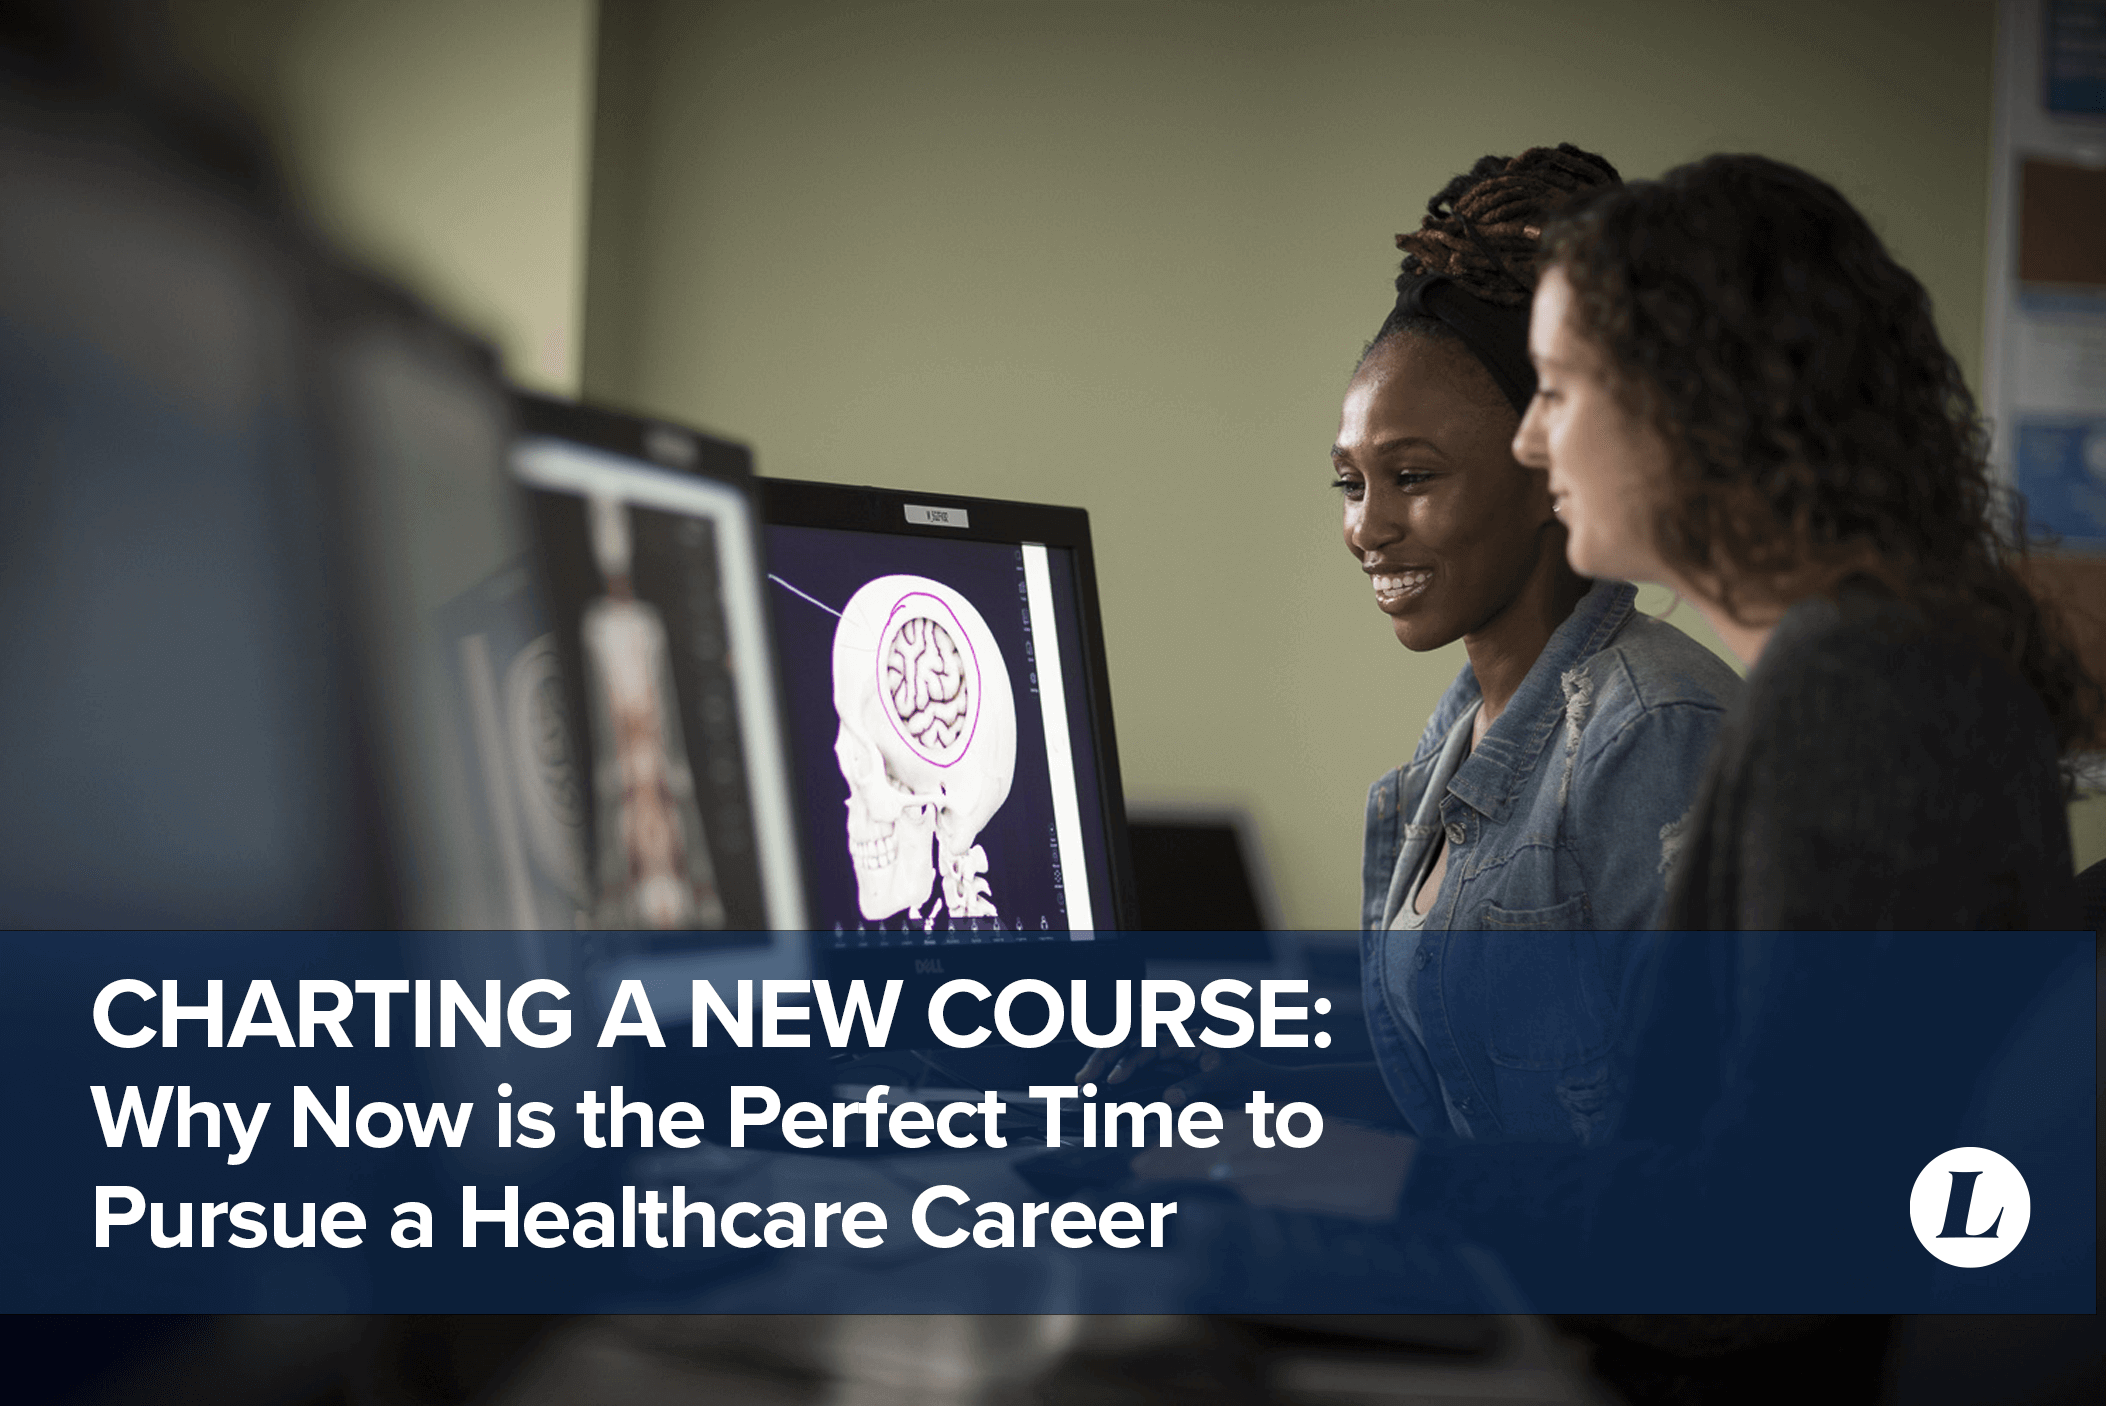 Charting a New Course: Why Now is the Perfect Time to Pursue a Healthcare Career